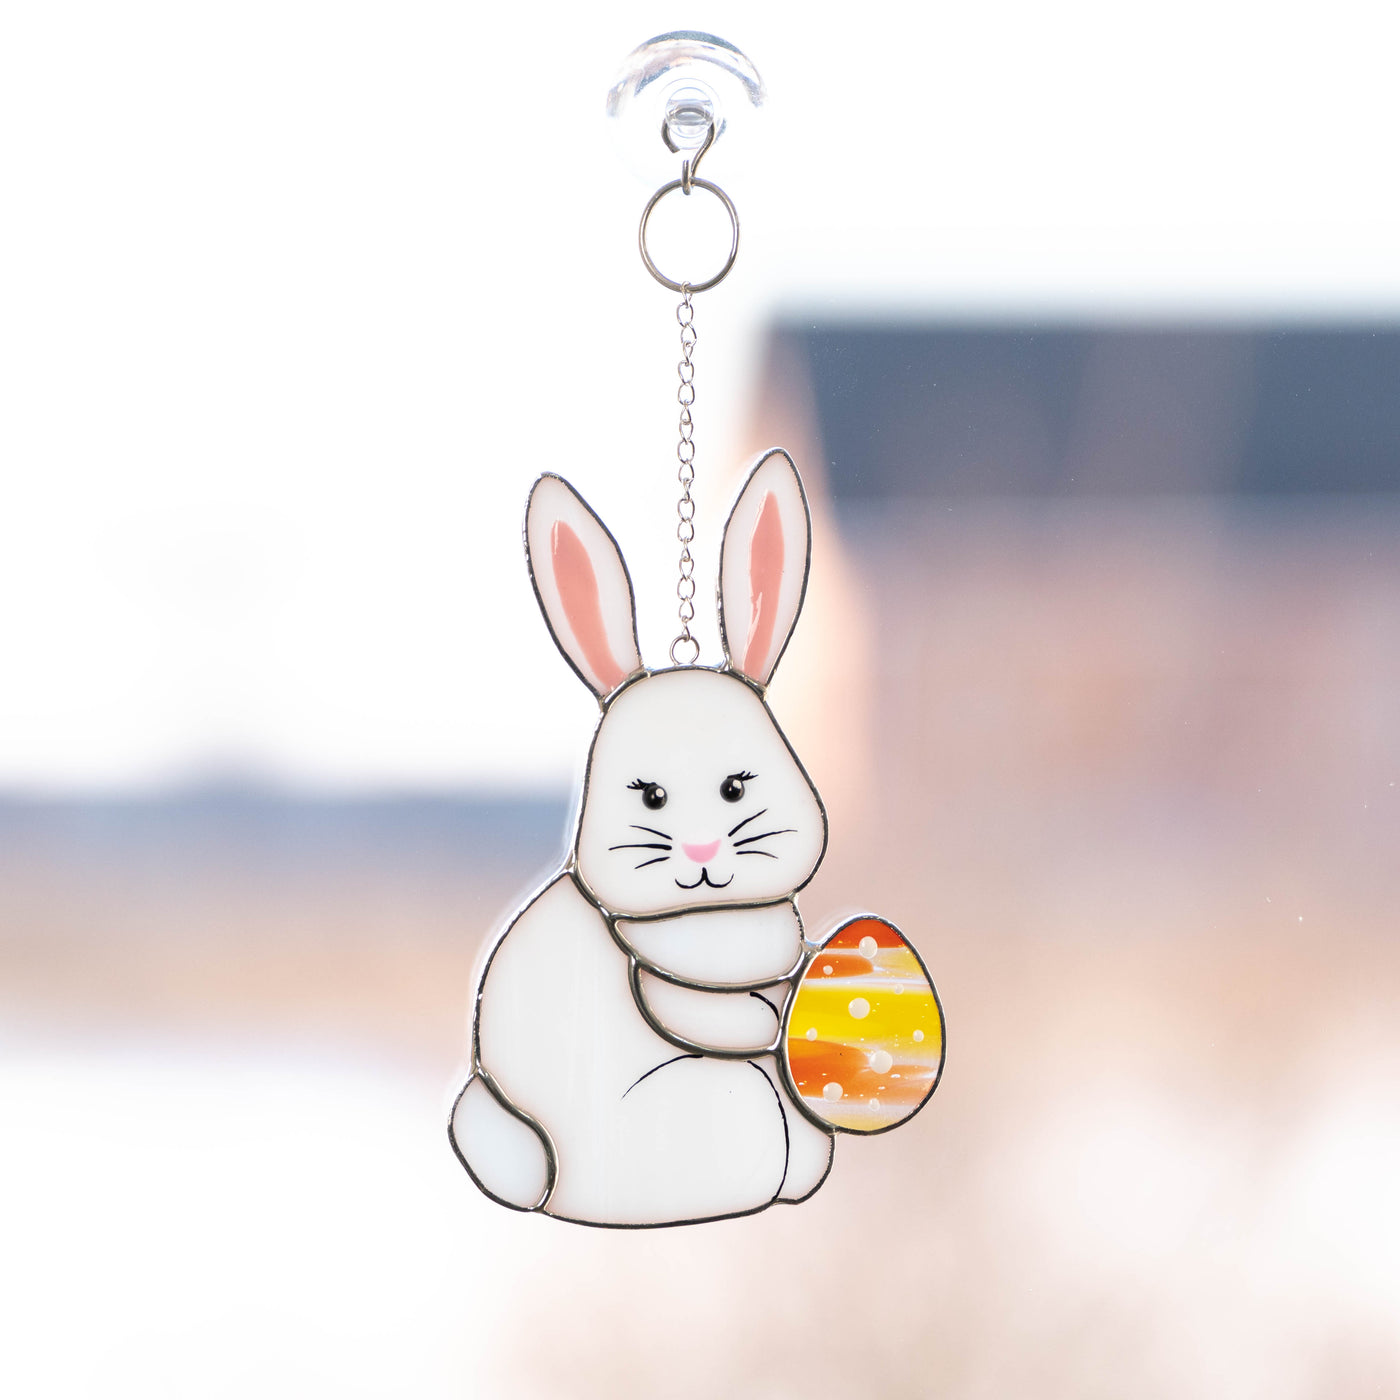 Stained glass bunny with an orange egg suncatcher for Easter 